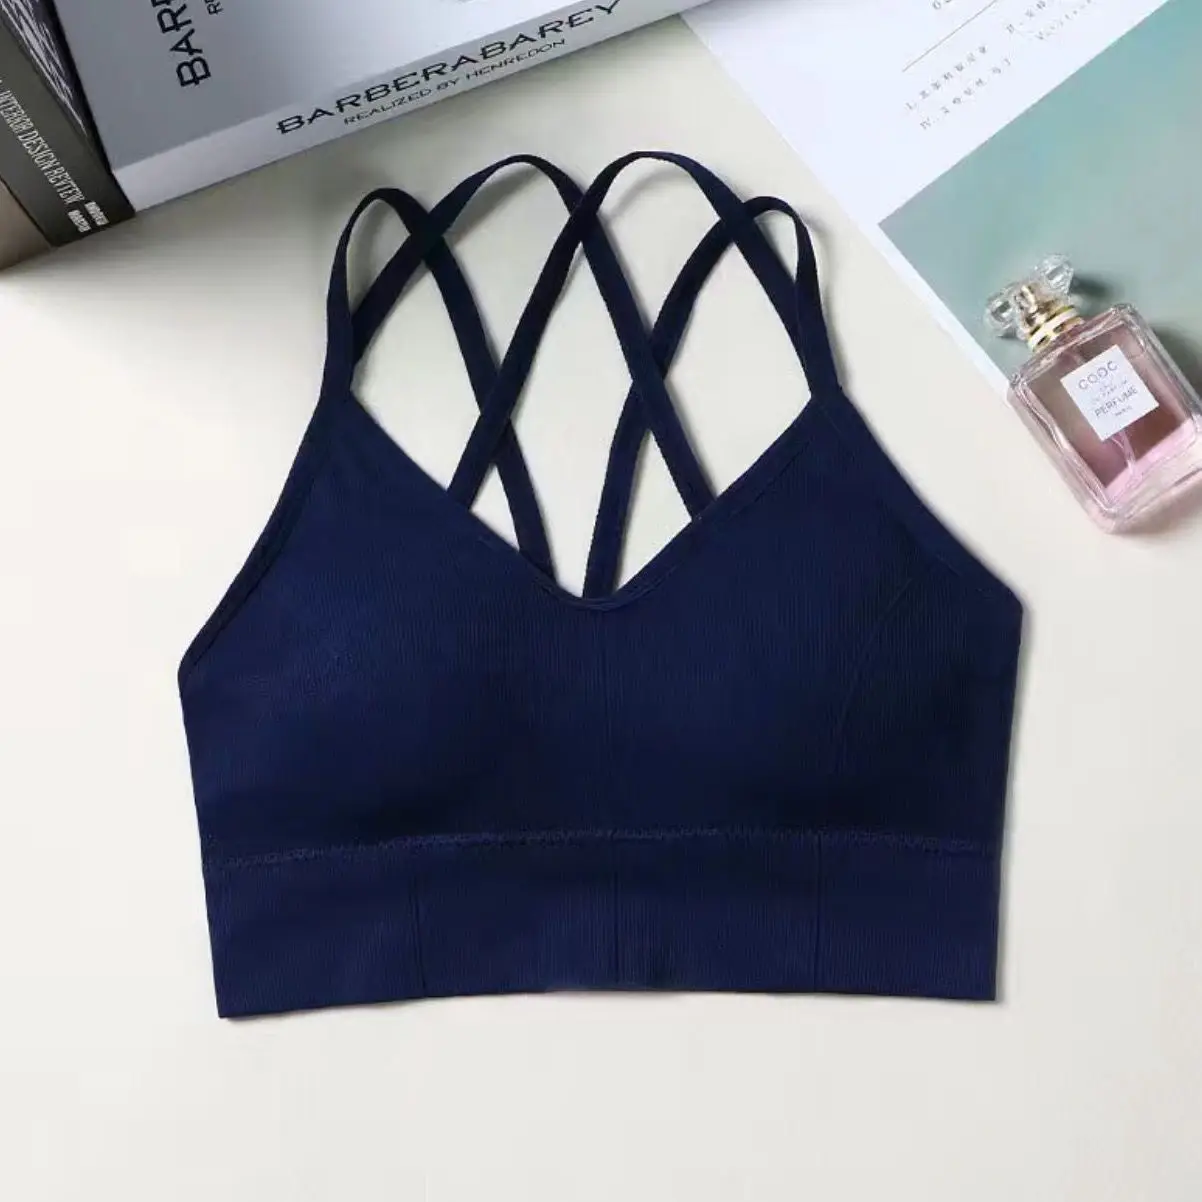 Is this a tube top or a bra? : r/tubetop